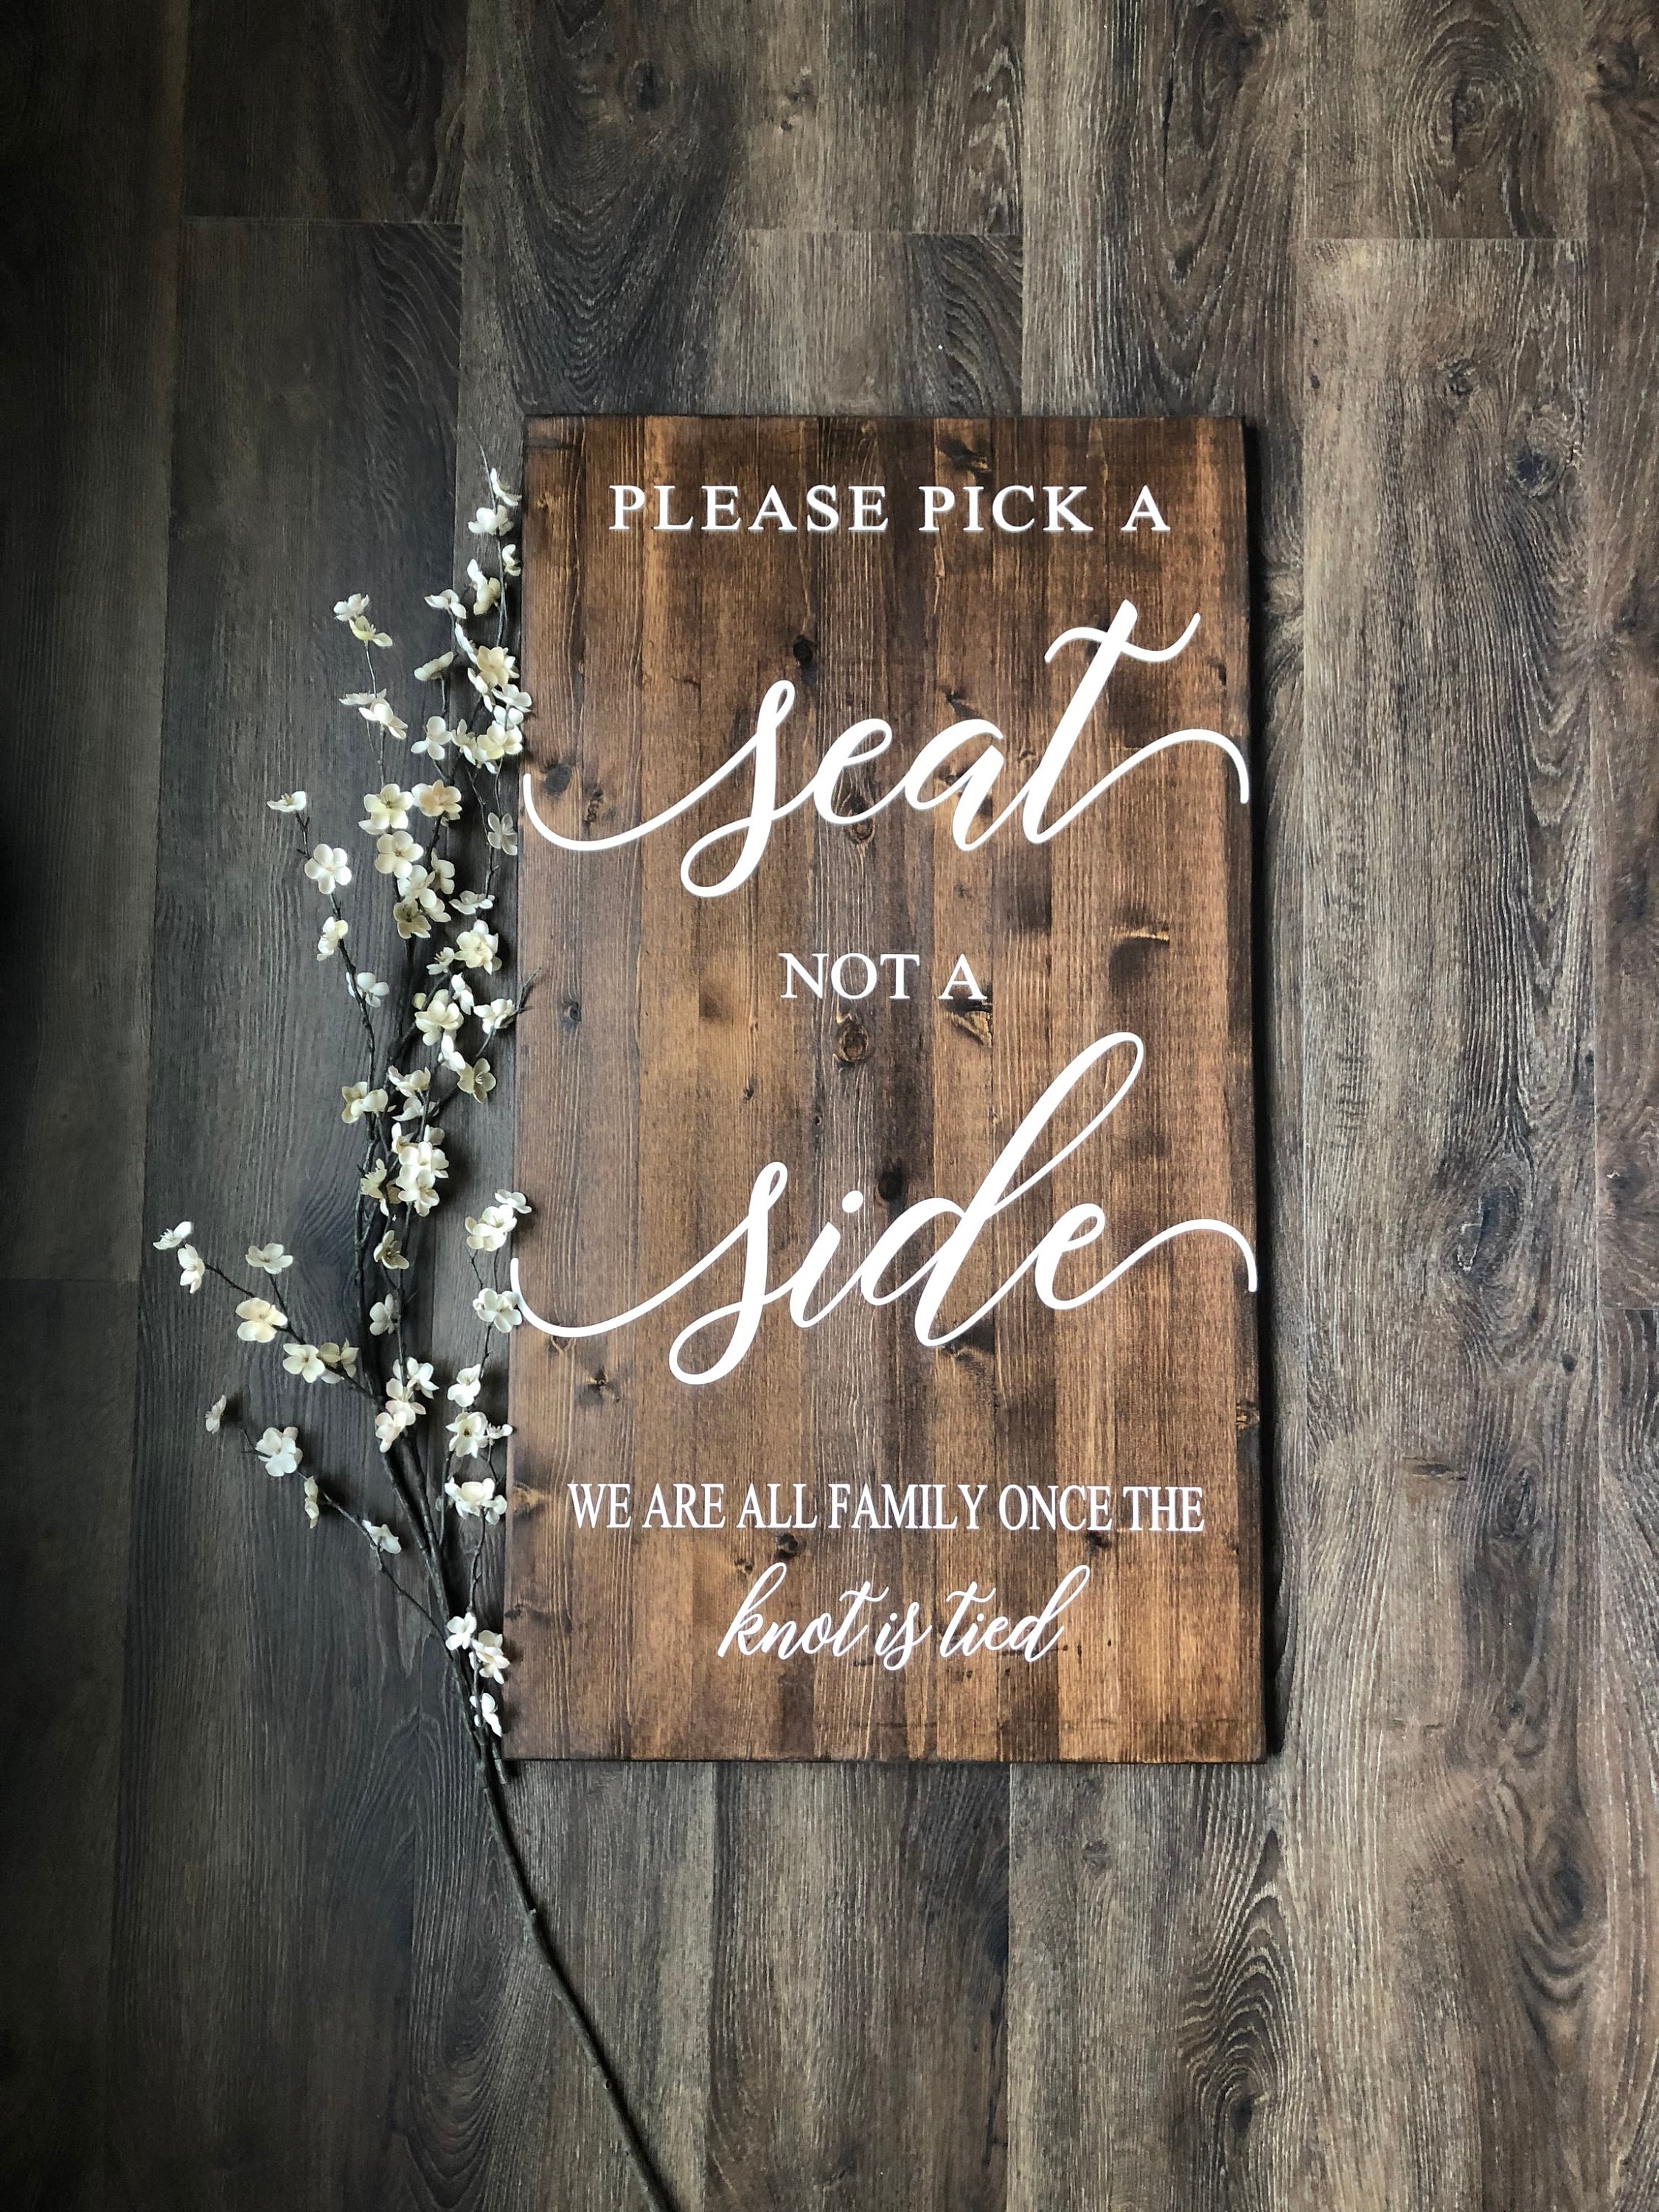 Please choose a seat not a side. Rustic seating sign. Rustic wedding s –  Bridges2You